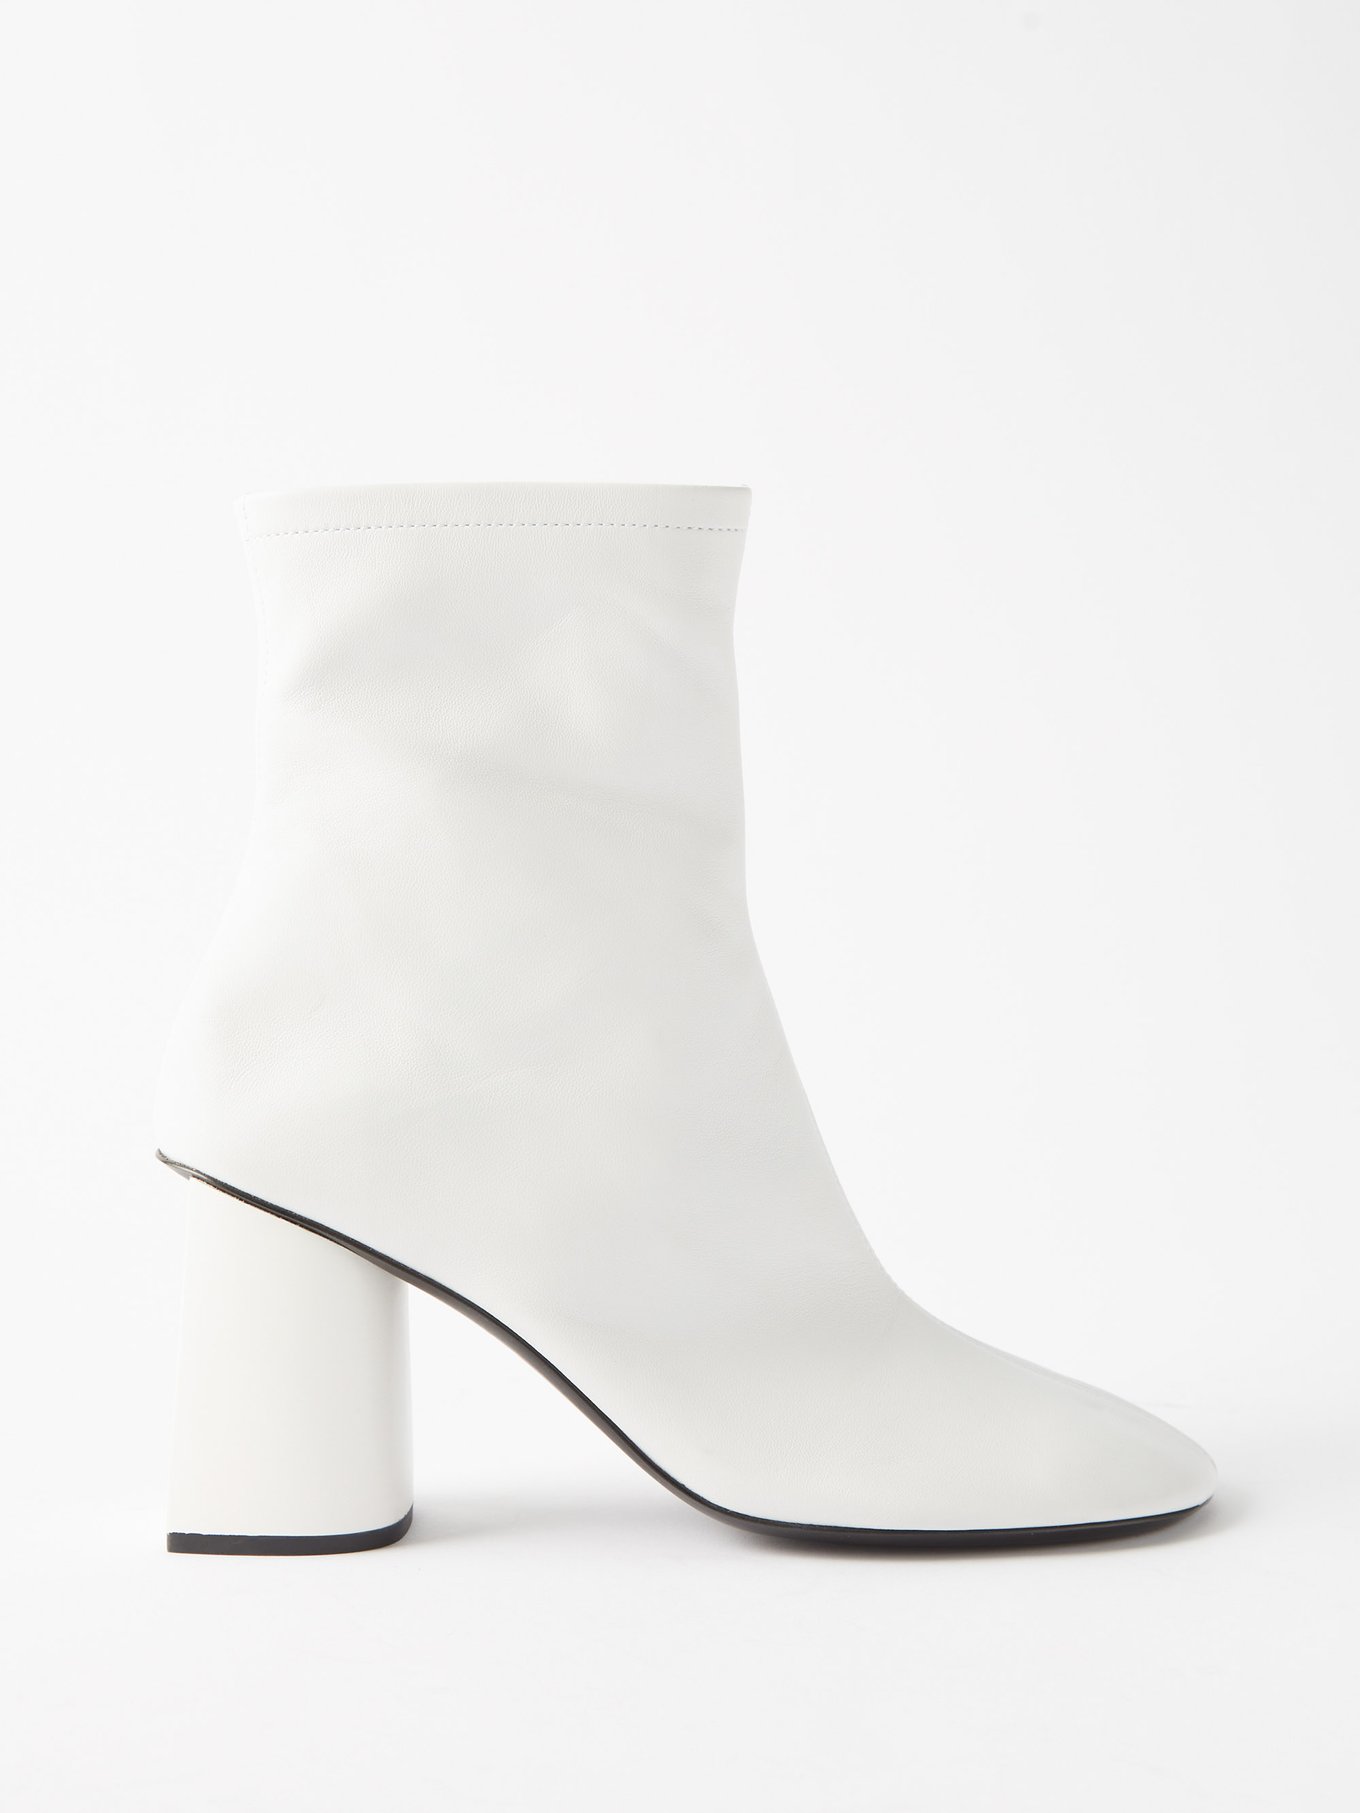 White Glove 80 inverted-heel leather ankle boots | | MATCHESFASHION